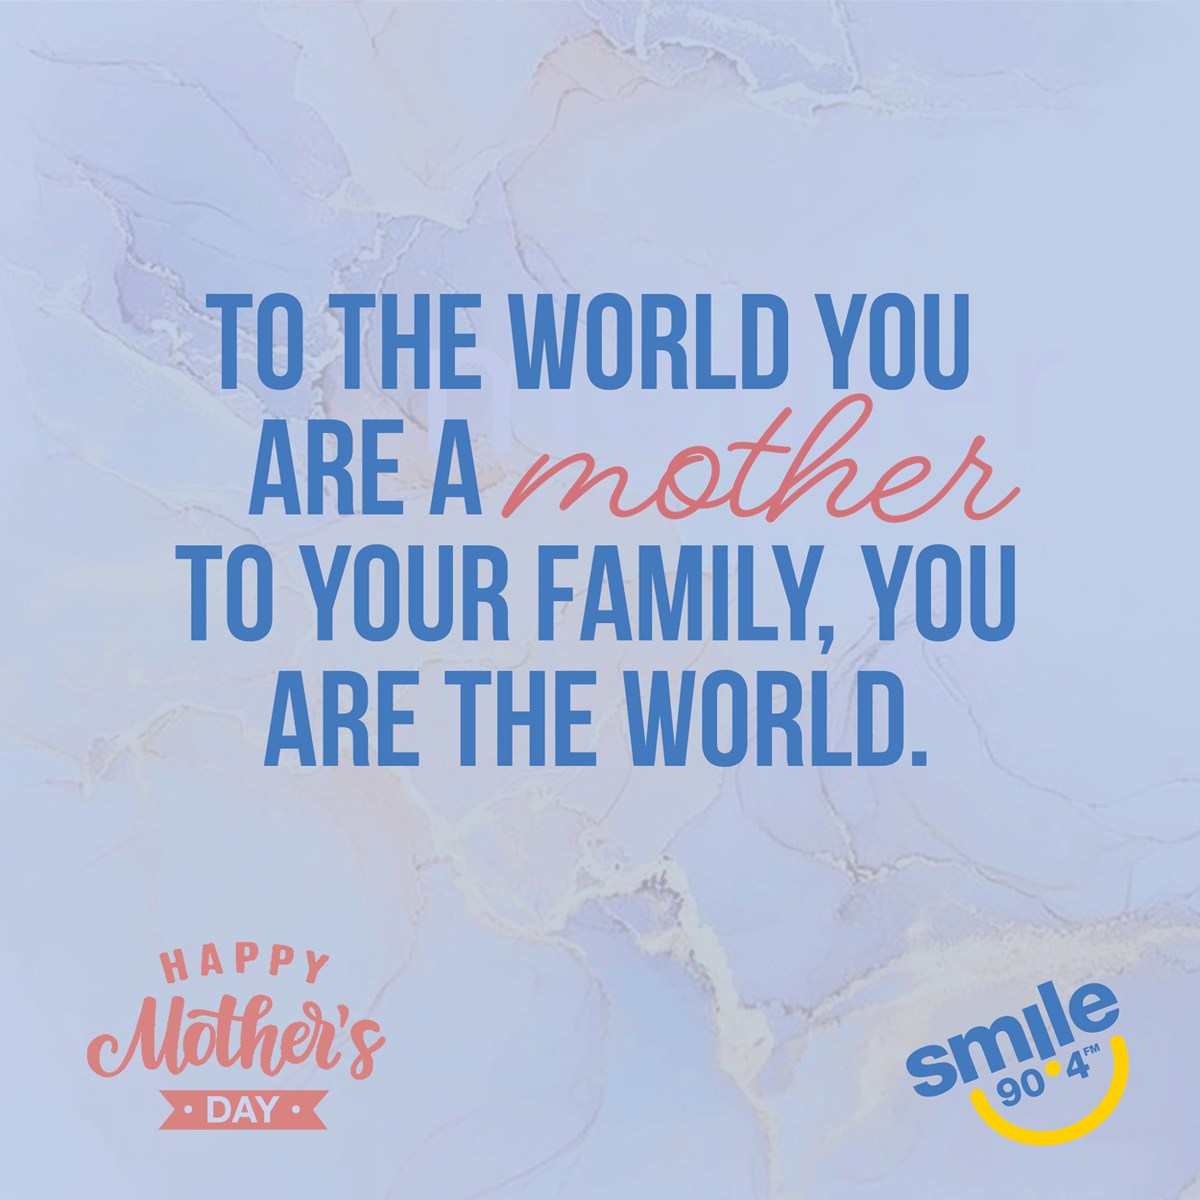 Today, we honor the incredible women who shape our world with their unconditional love and unwavering strength. Happy Mother's Day from all of us at Smile FM! 💐✨